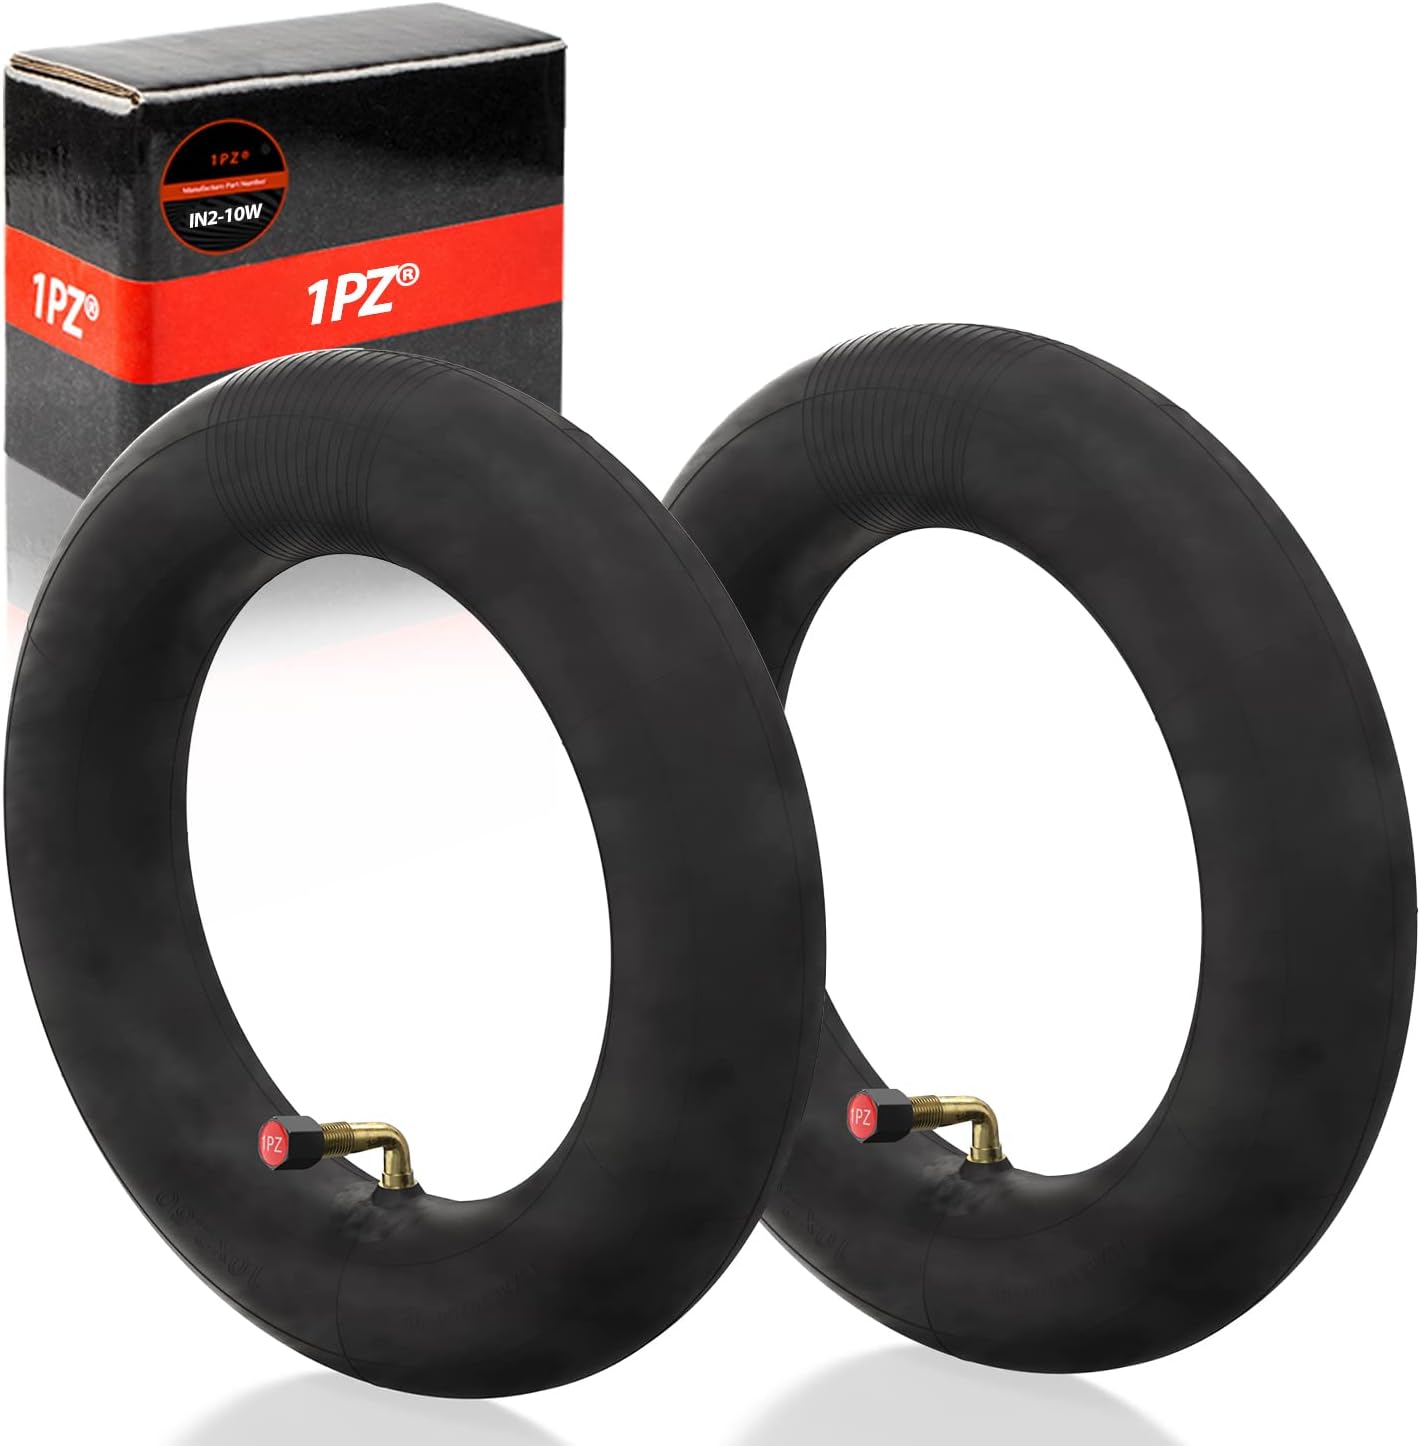 1PZ IN2-10W 10x2.50 Inner Tube with 90°Elbow Valve for Smart Self Balance Electric Scooter 36v 48v 400w 500w 800w Hub Motor